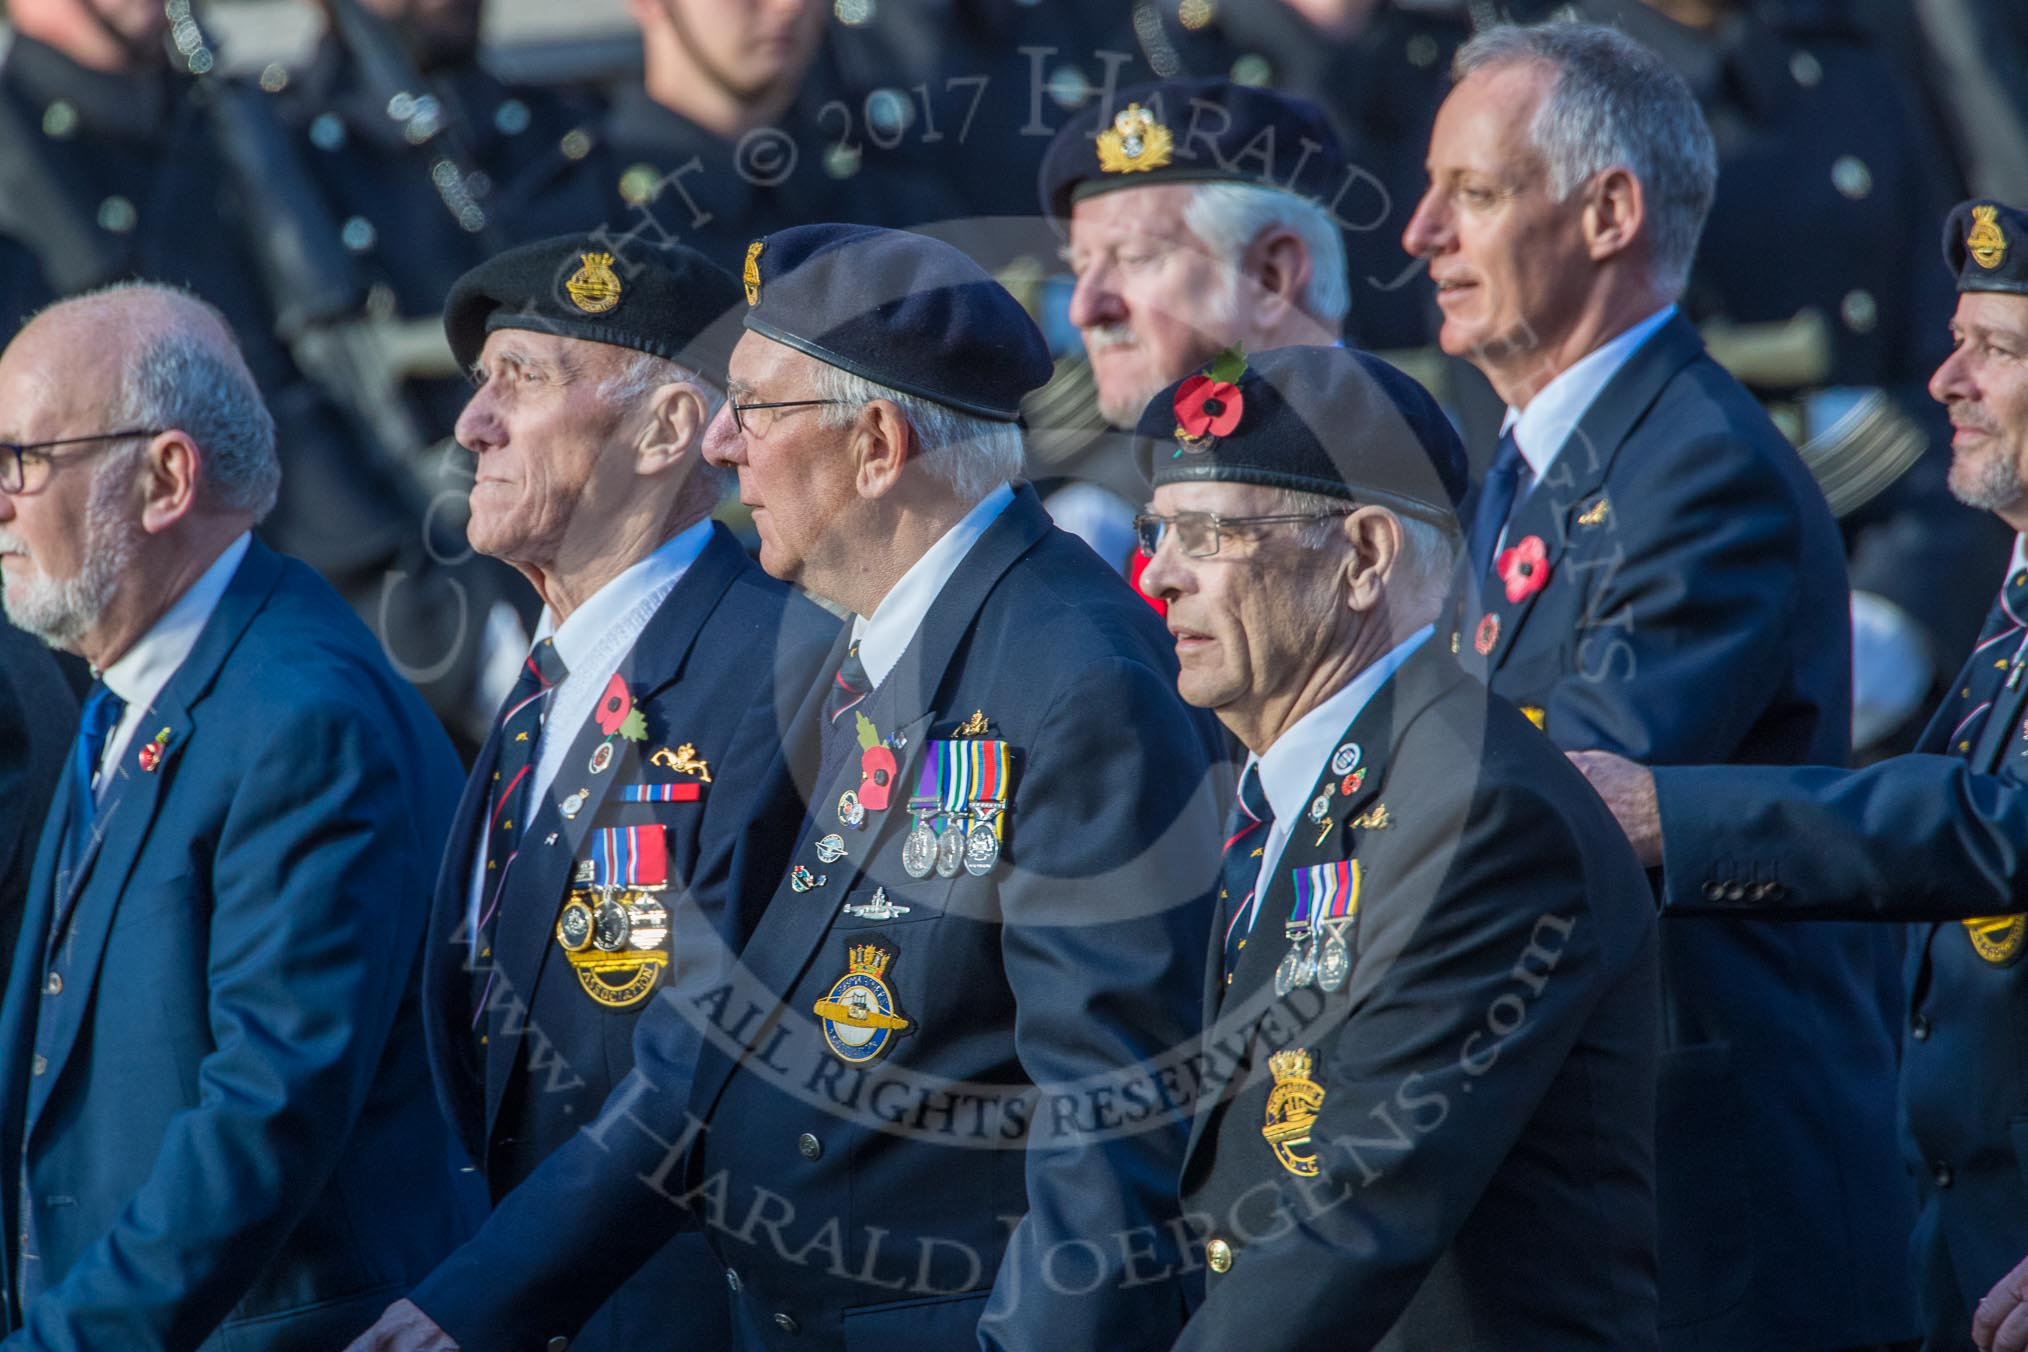 Submariners Association   (Group E38, 28 members) during the Royal British Legion March Past on Remembrance Sunday at the Cenotaph, Whitehall, Westminster, London, 11 November 2018, 11:46.